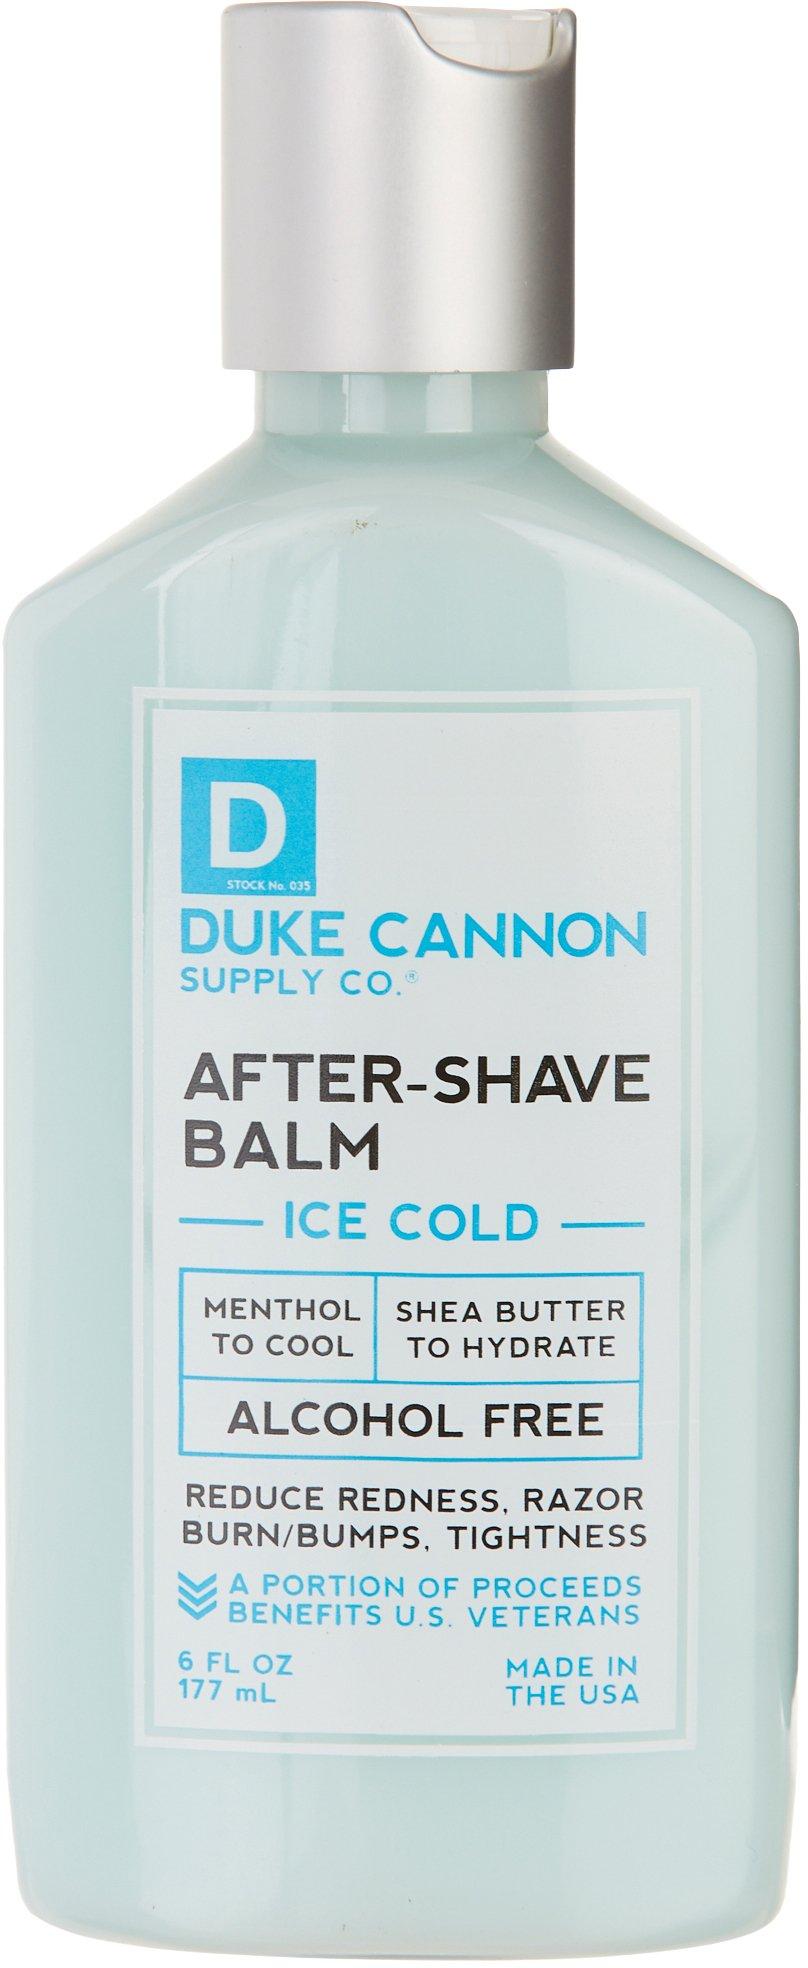 6 oz Ice Cold After-Shave Balm